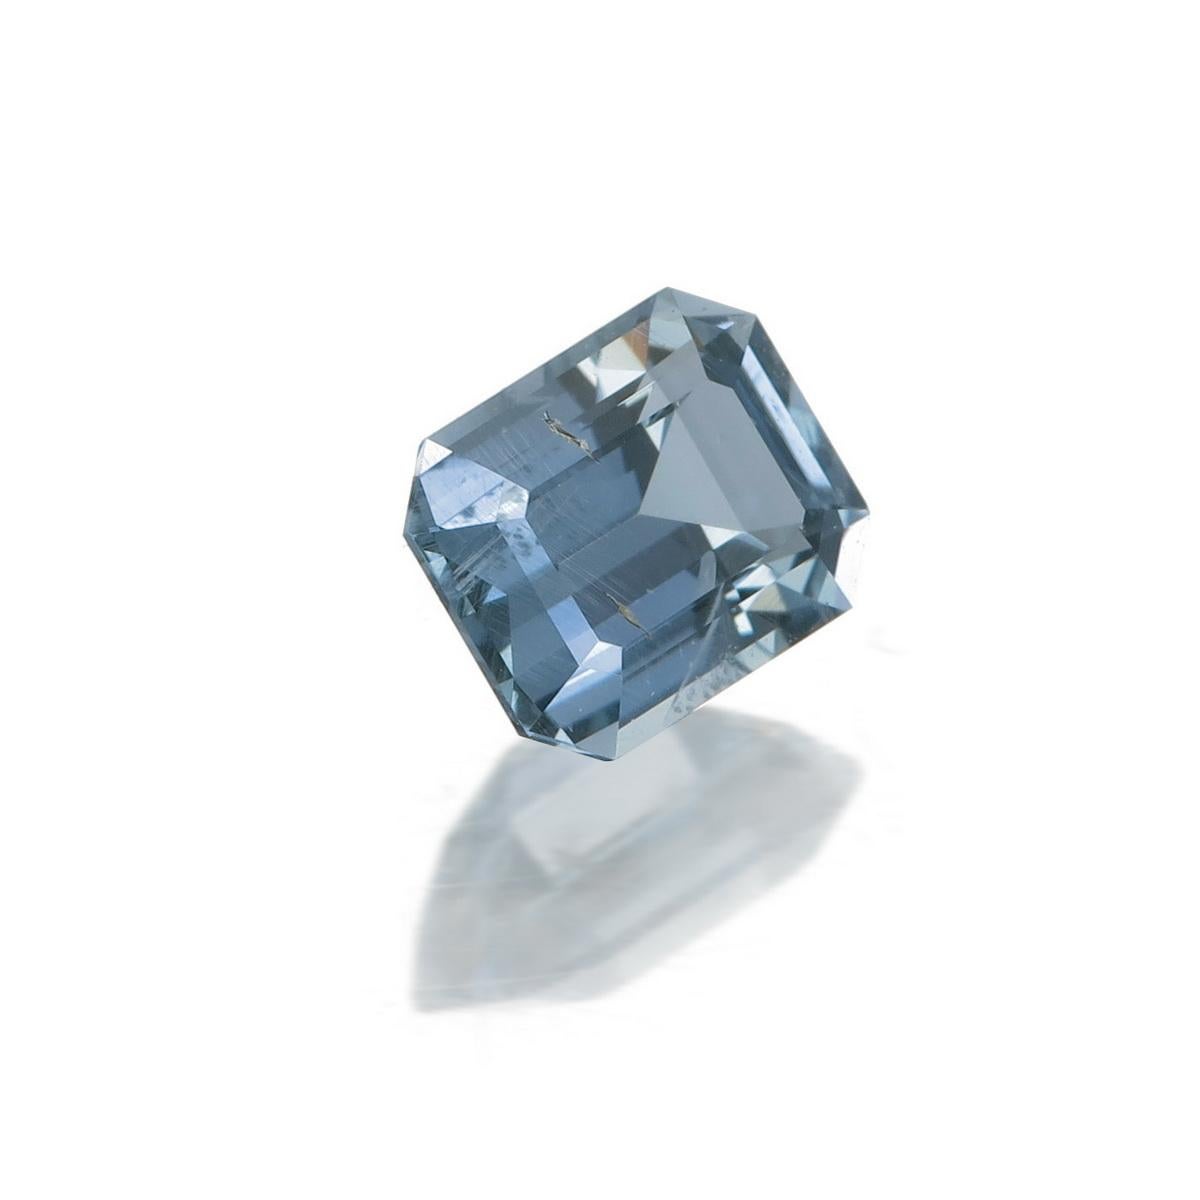 1.05 Carat Natural Blue Spinel from Sri Lanka (Ceylon)
Dimension: 6.43 x 5.17 x 3.51 mm
Weight: 1.05 Carat
Shape: Octagon Cut
No Heat
GIL Certified Report No: STO2023010552114